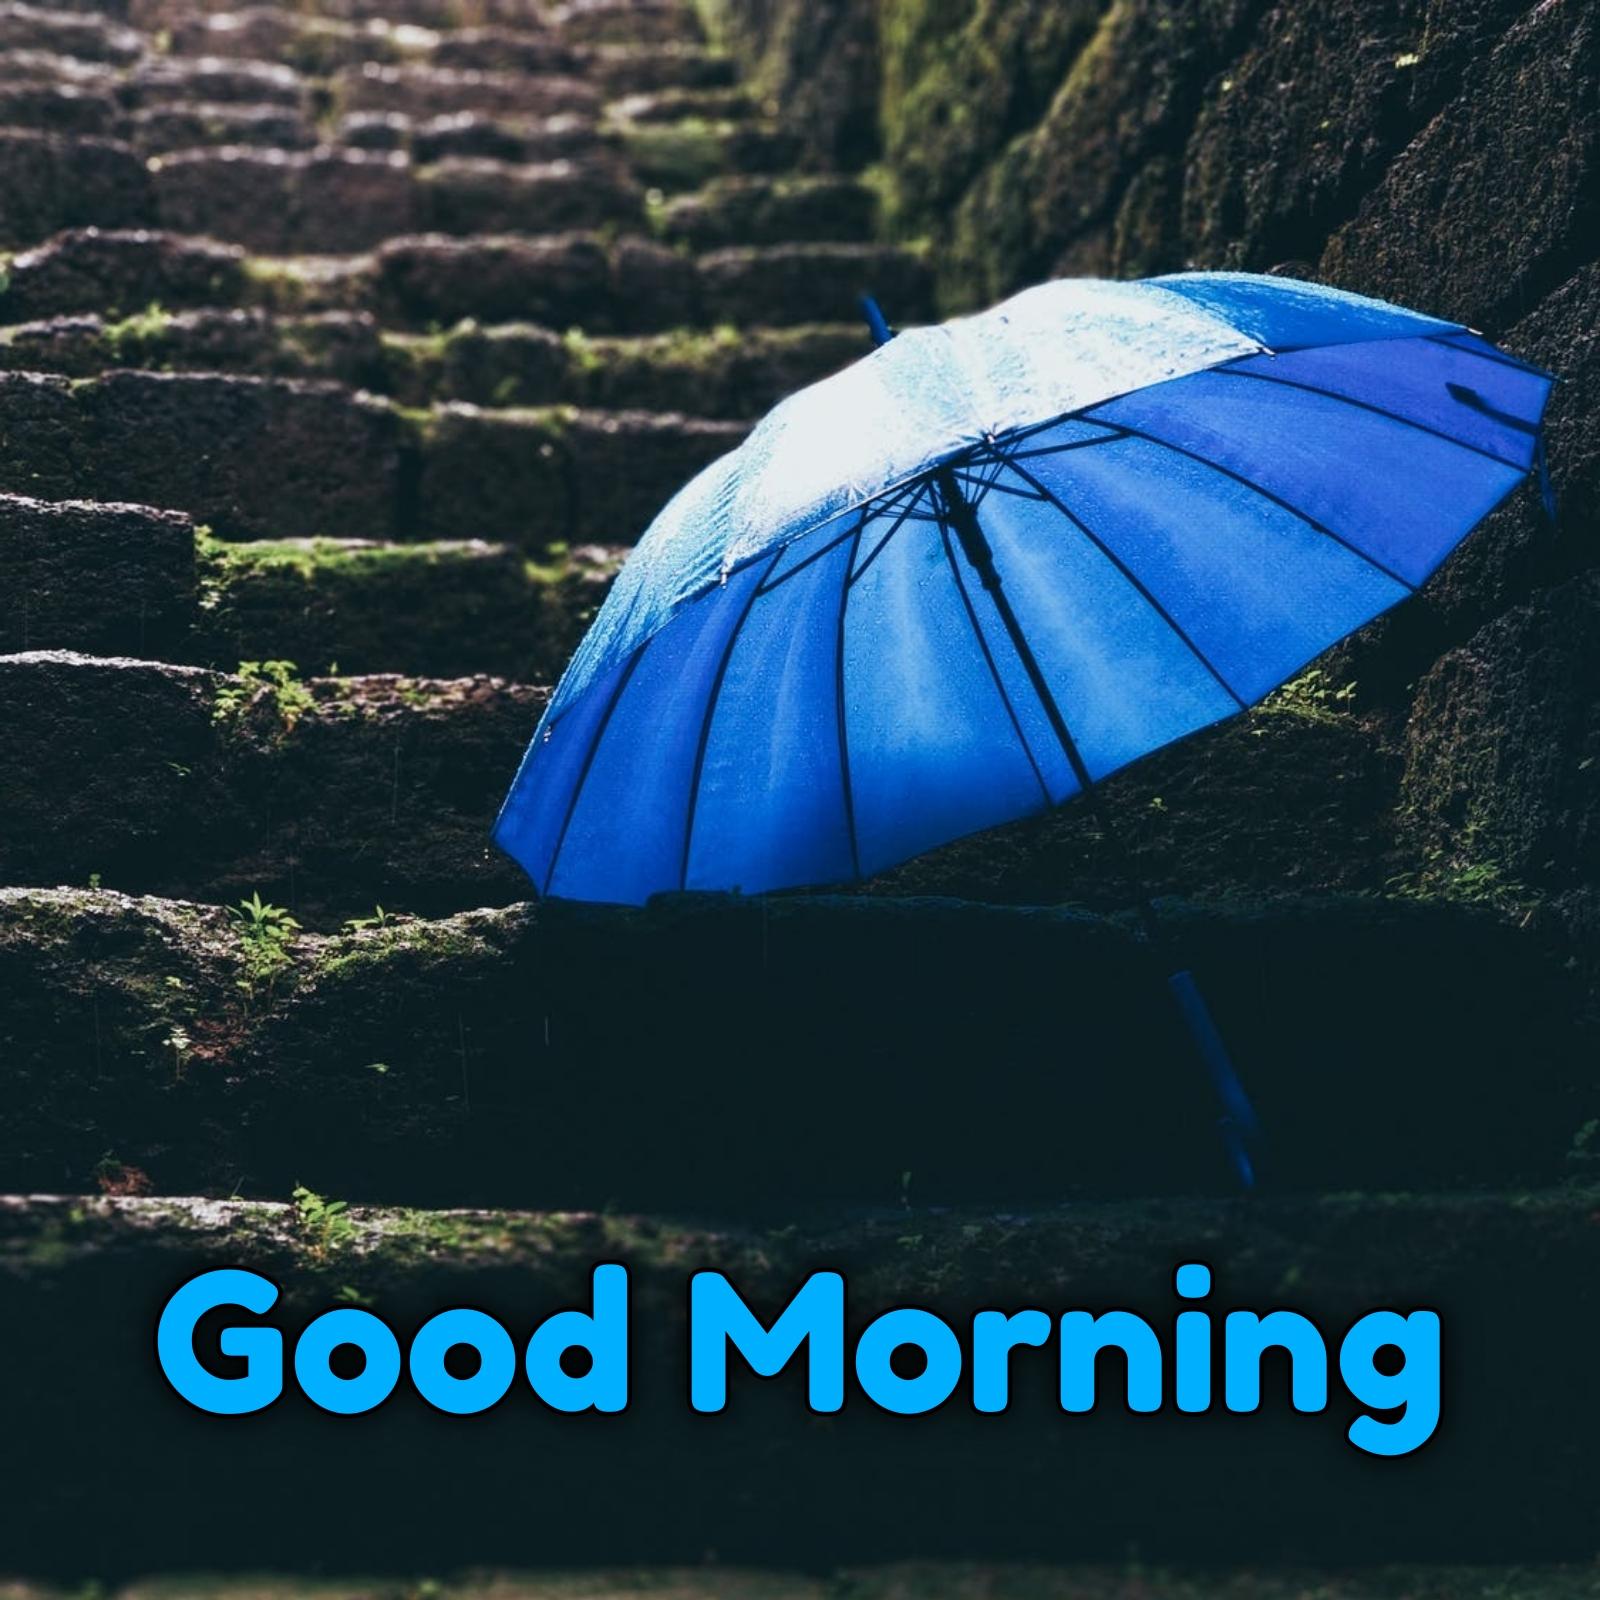 Good Morning Images With Umbrella